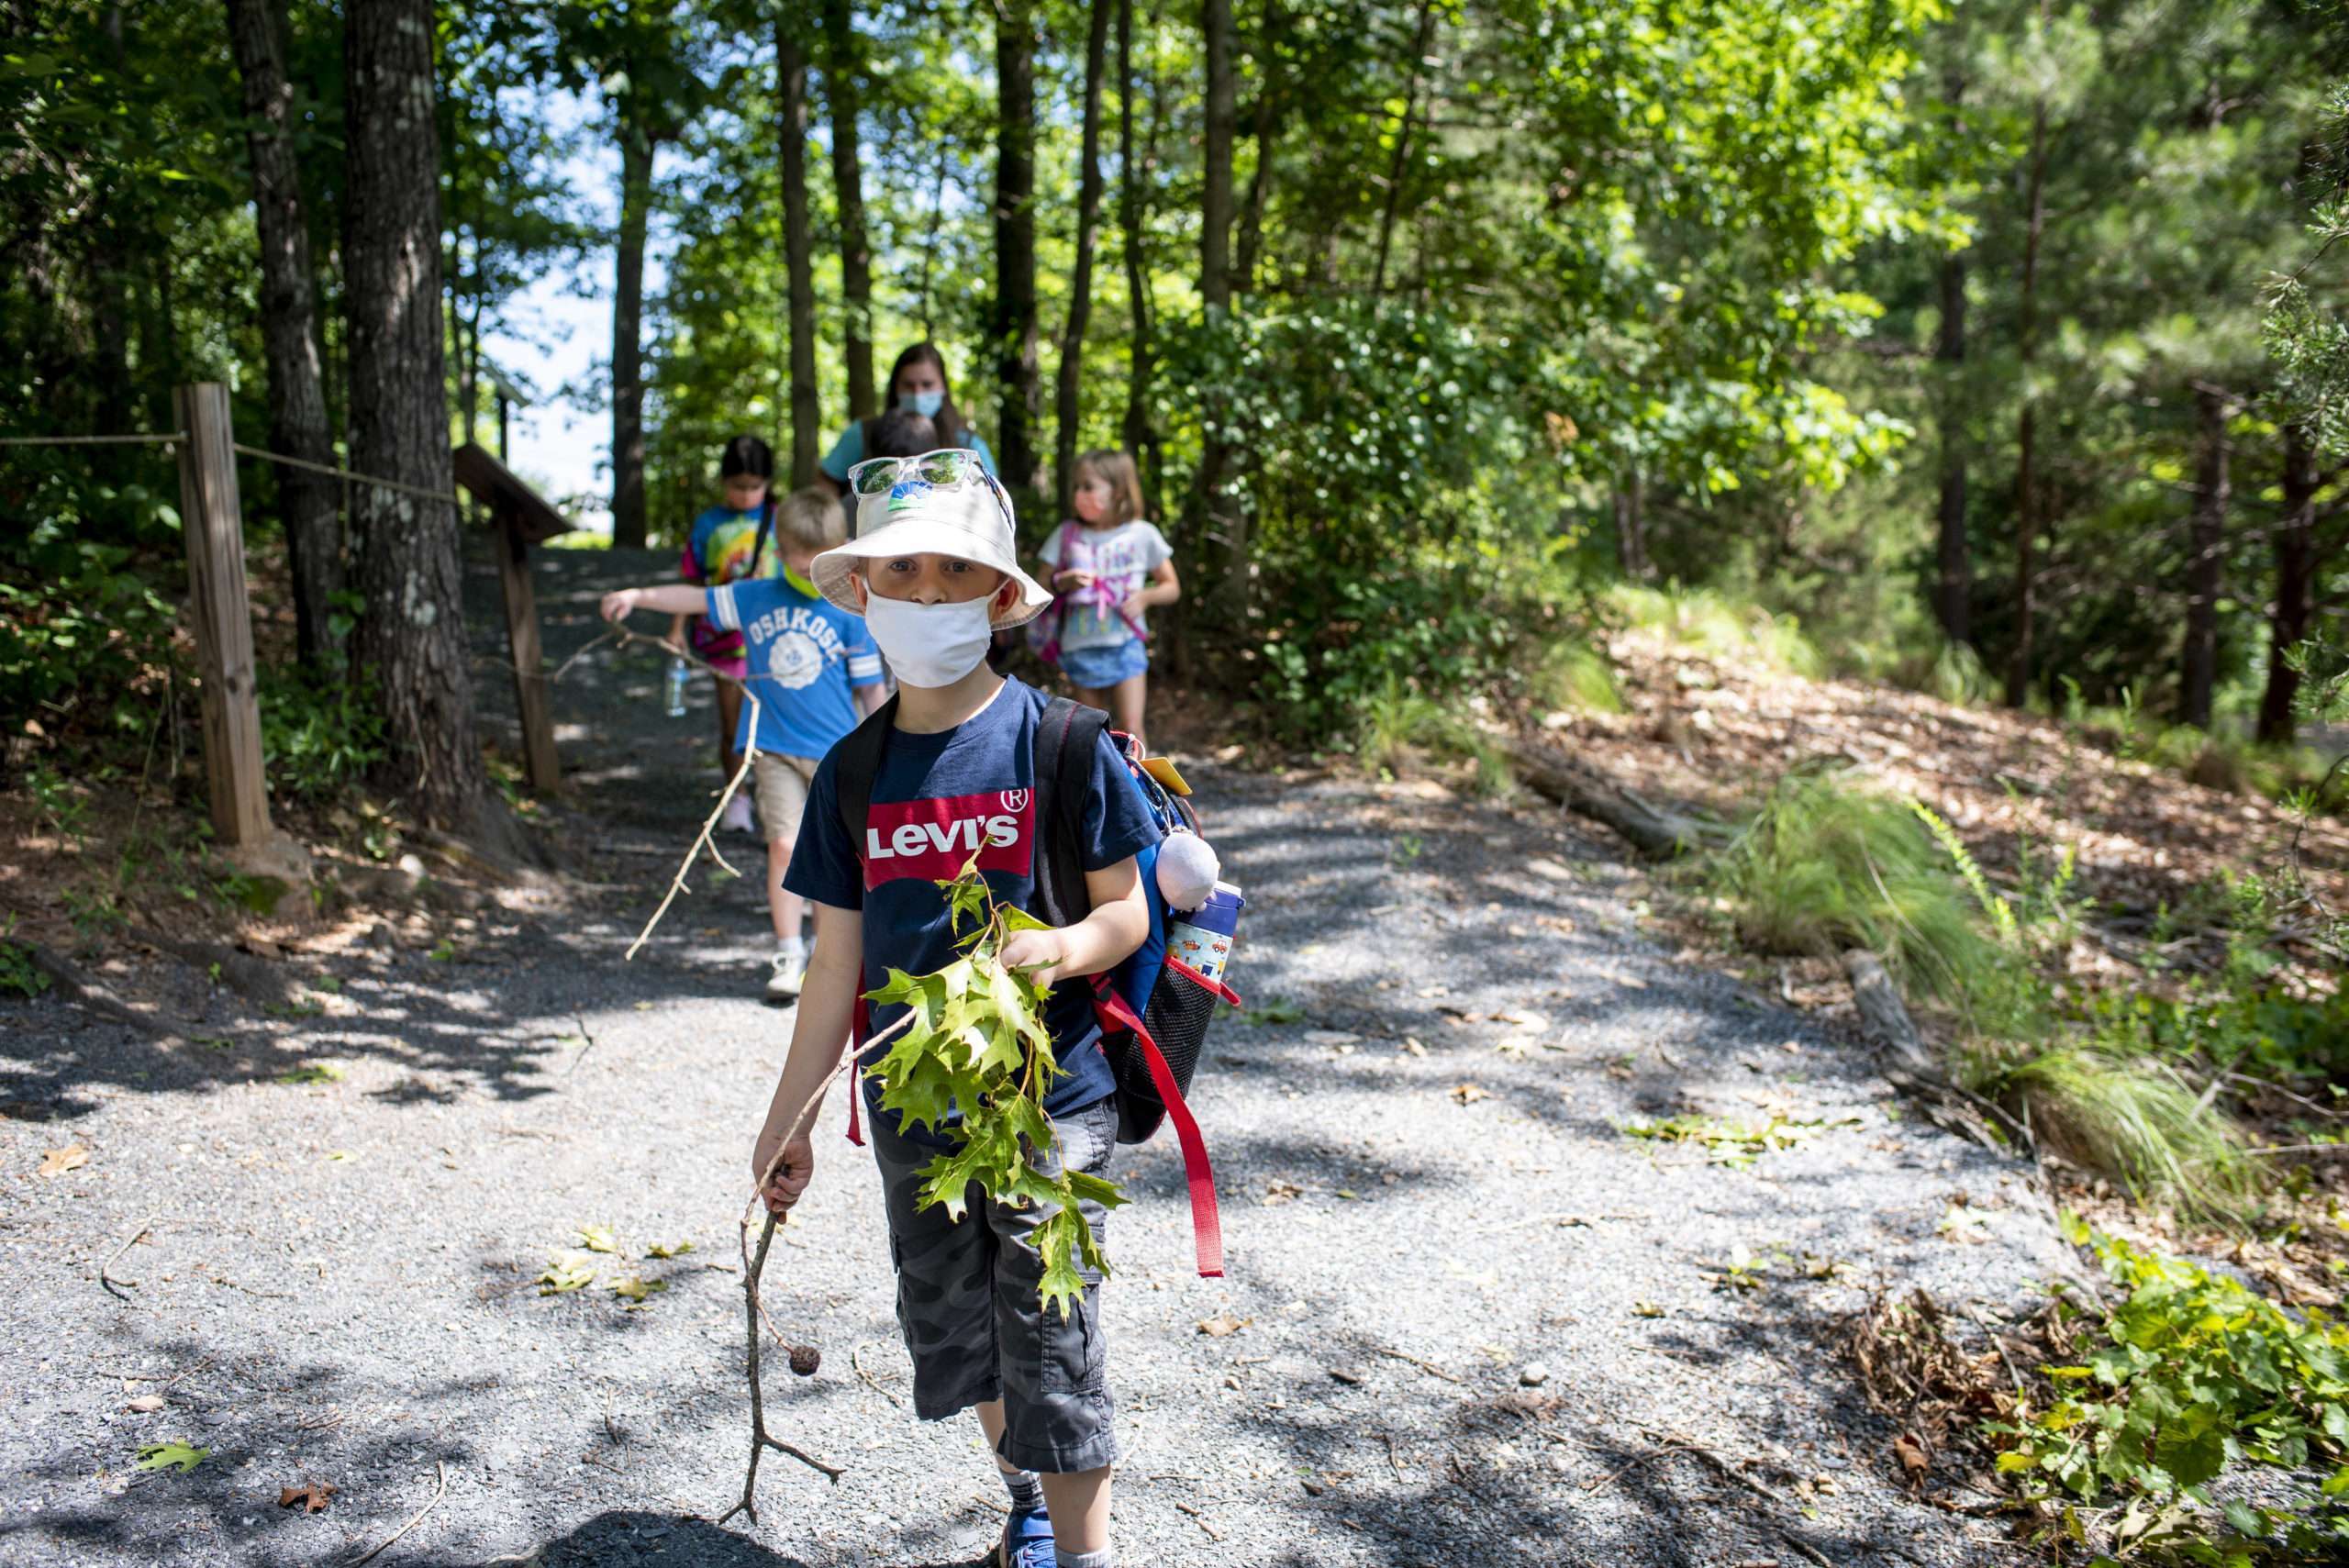 Gwinnett Environmental and Heritage CenterSummer Camps during COVID-19